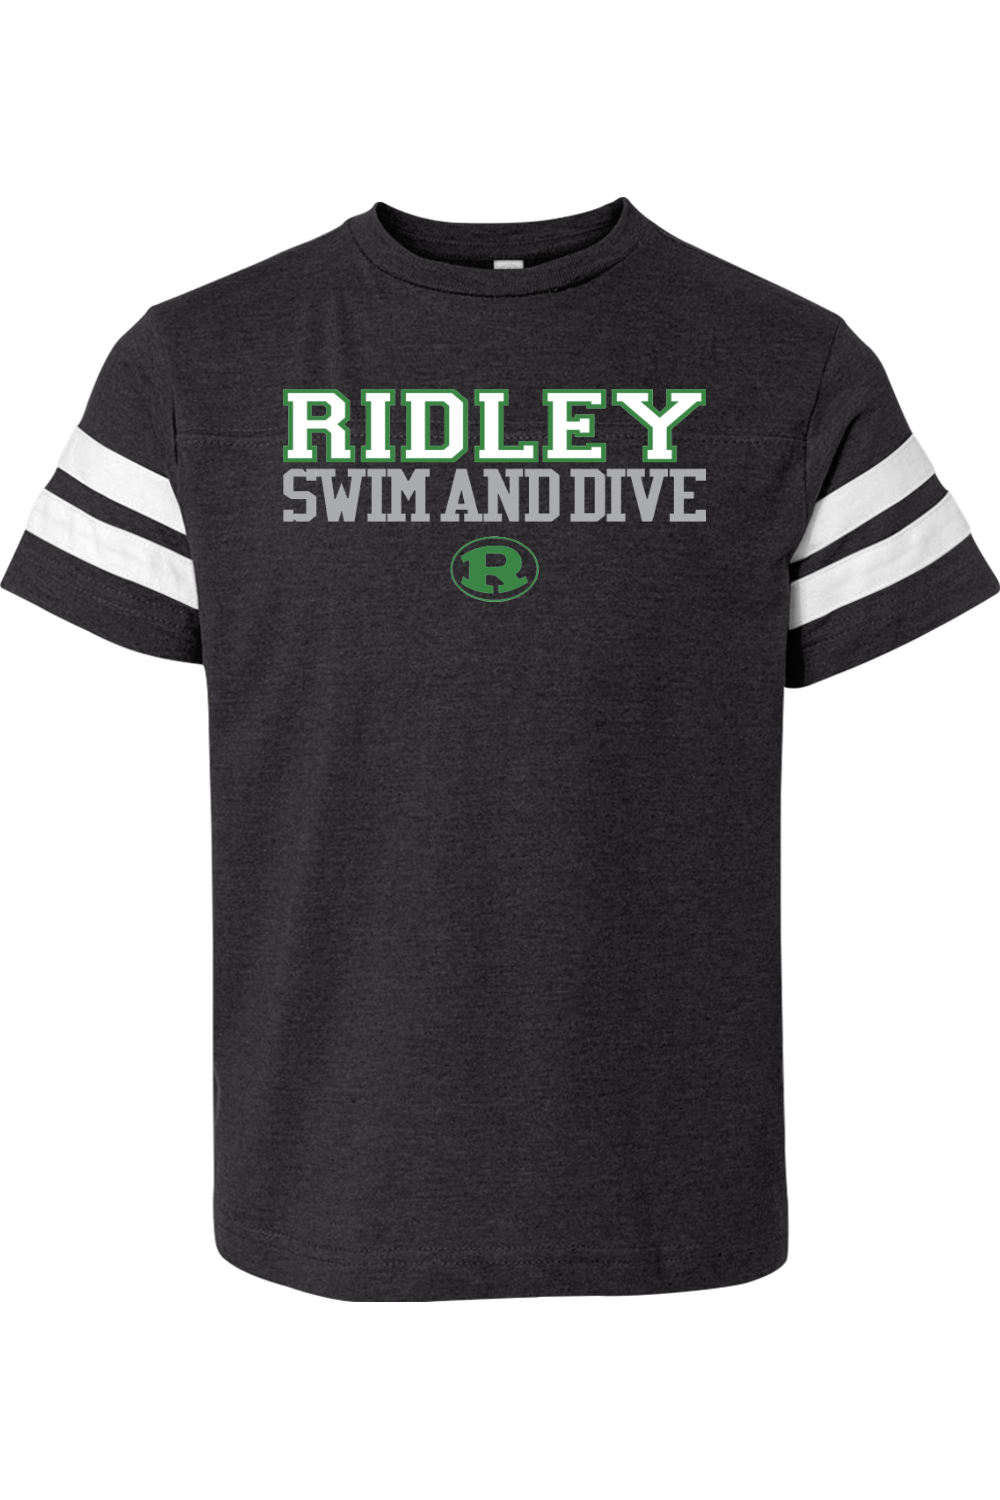 Ridley Swim and Dive Youth Jersey Tee